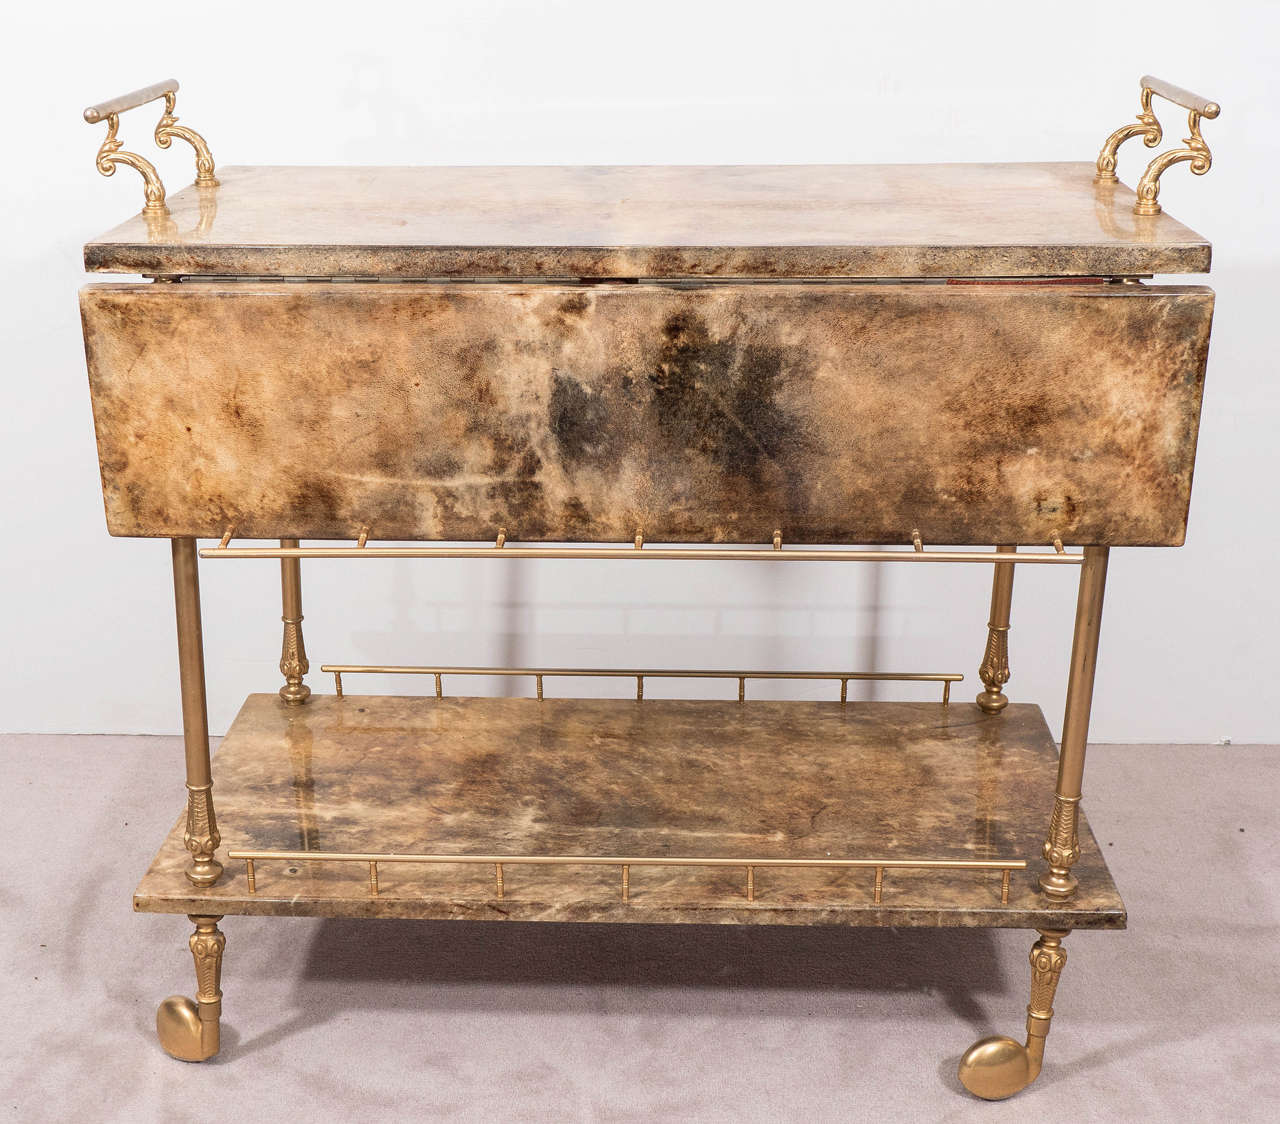 A vintage Italian two-tier bar cart, produced circa 1950's by designer Aldo Tura, veneered in lacquered goat skin, with scroll work handles, classically formed legs and casters in polished brass. Good vintage condition, consistent with age and use,